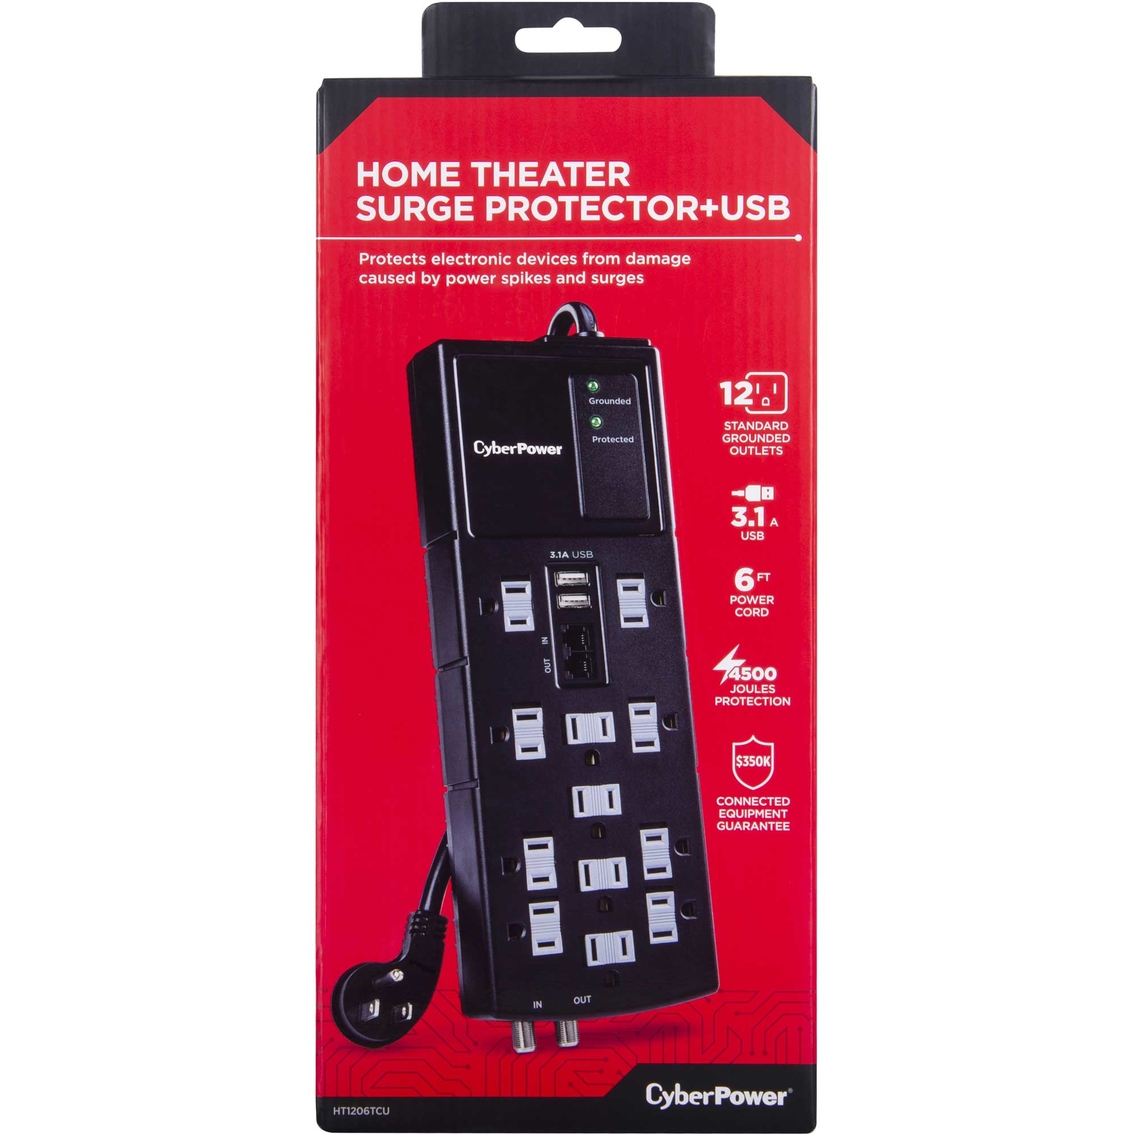 Cyber Power 12 Outlet Surge Protector with 2 USB Ports - Image 4 of 6